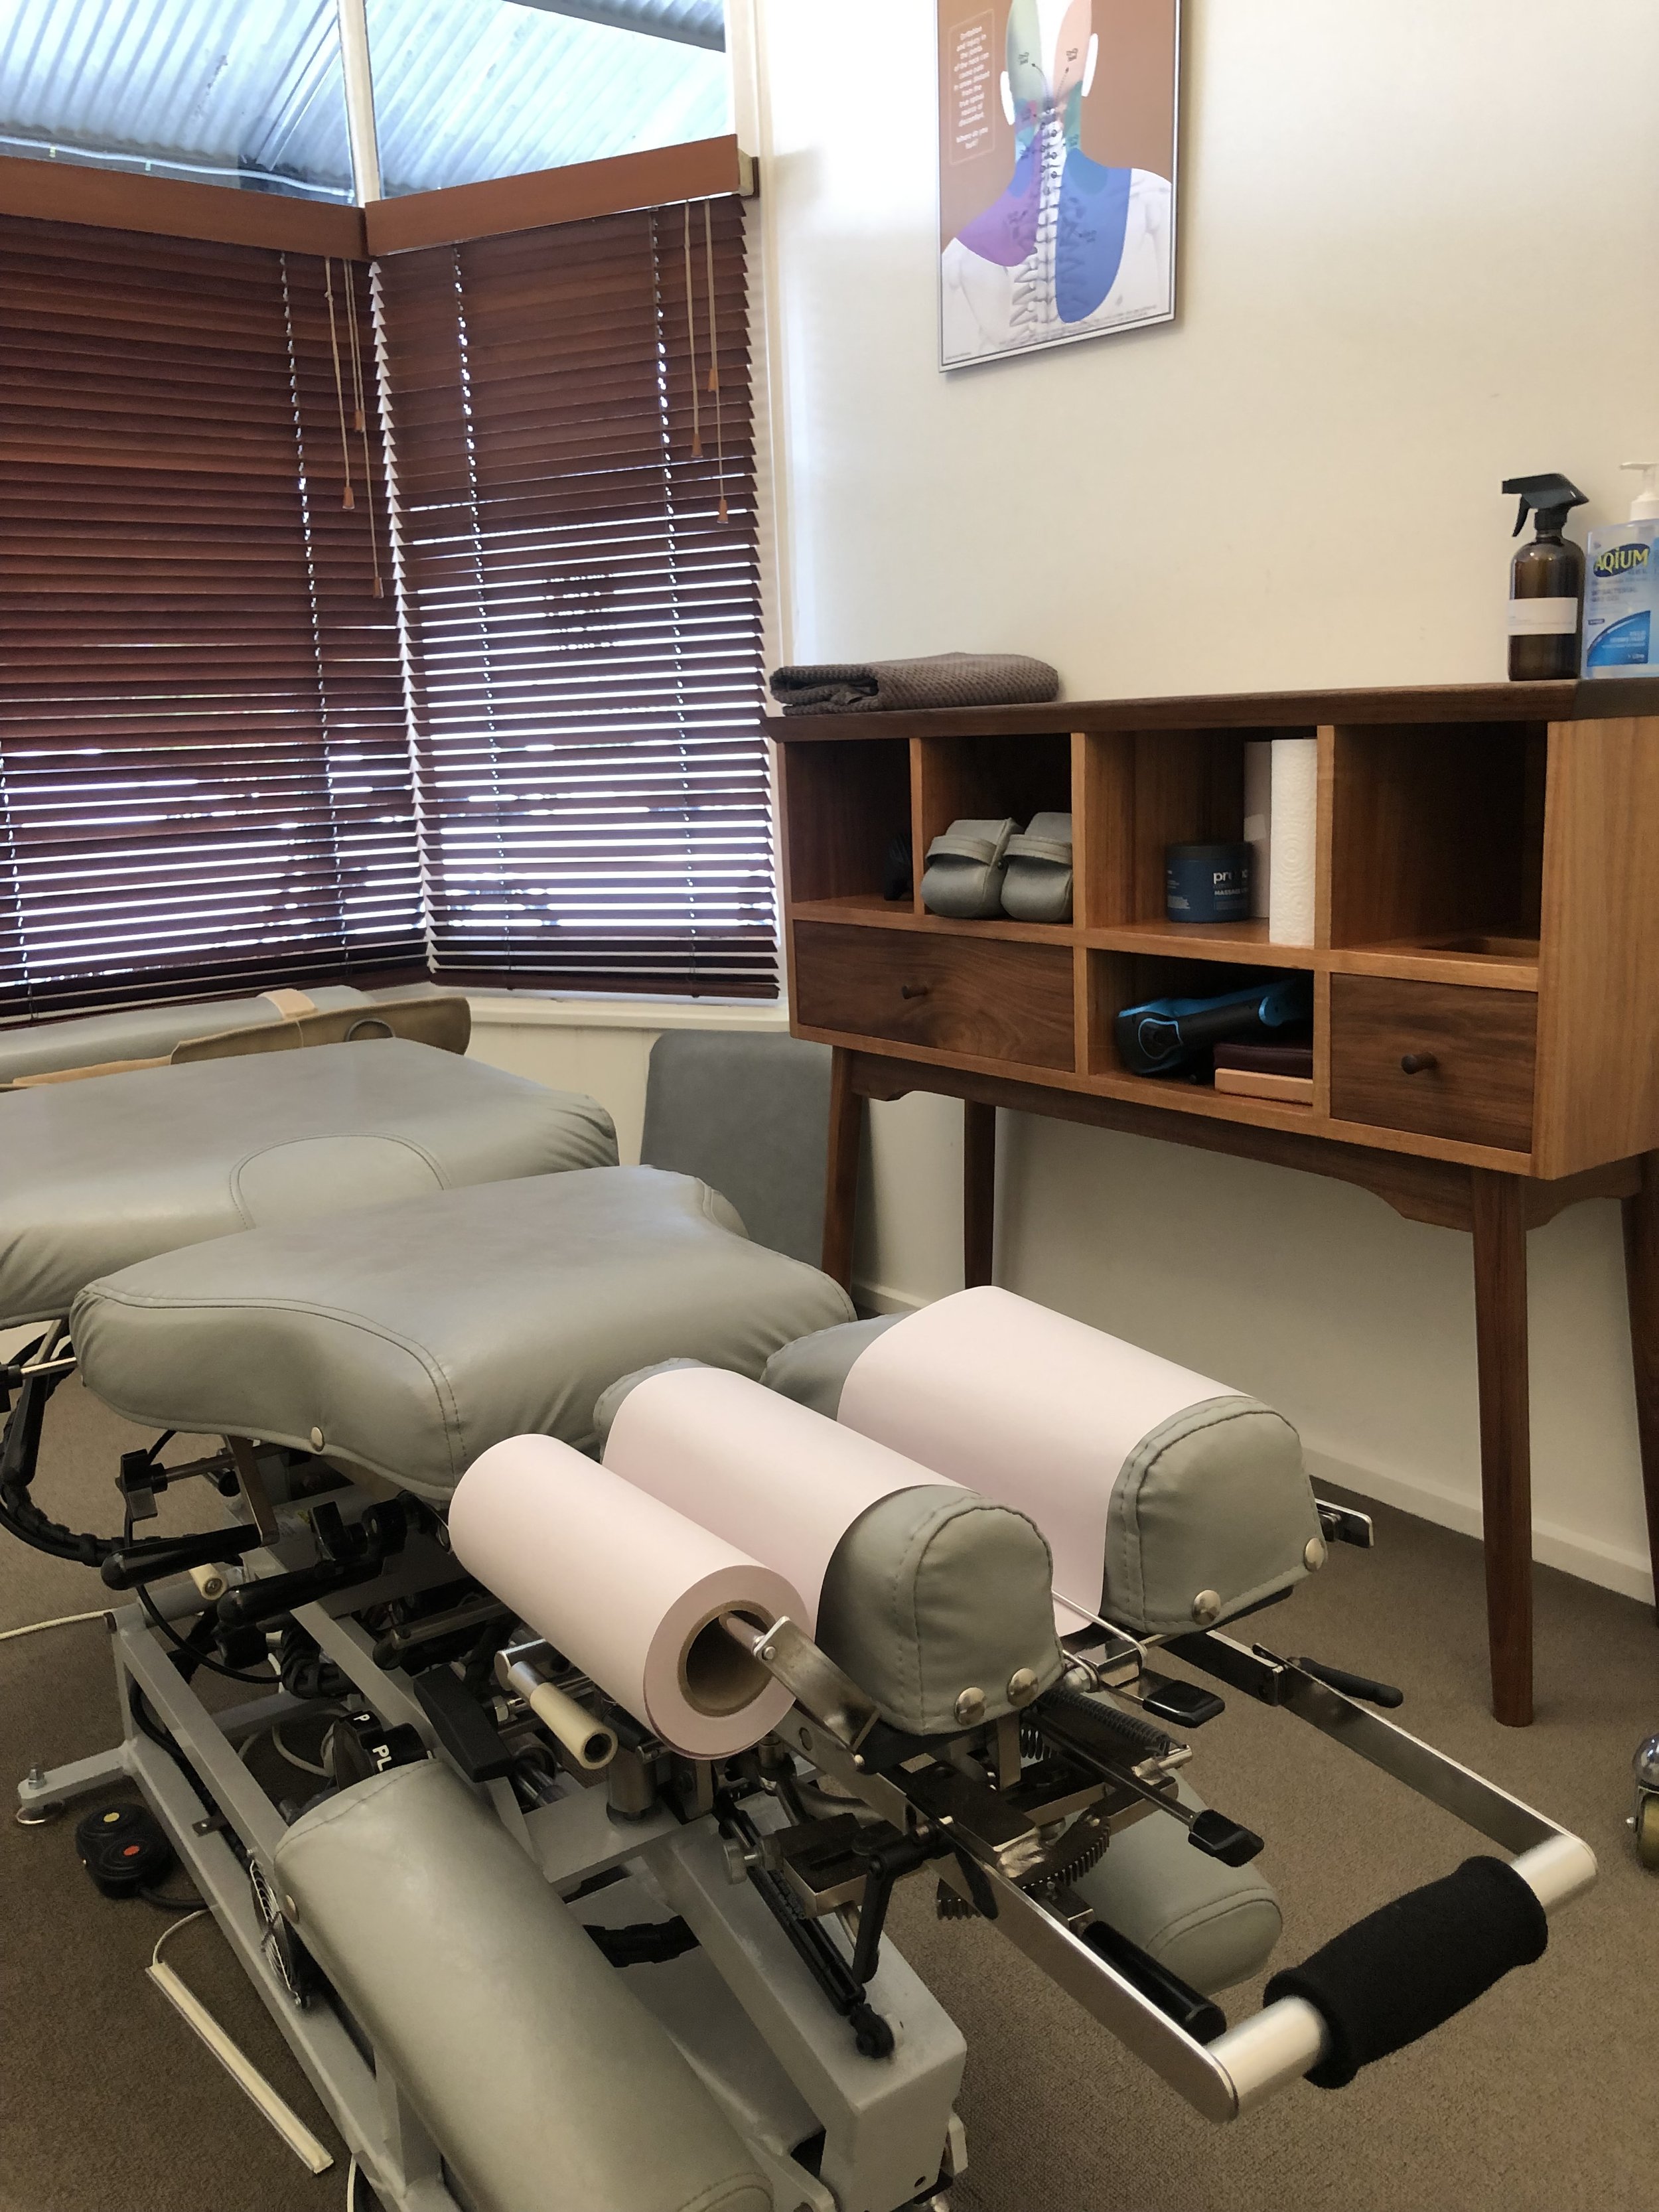 Specialised treatment table used for treating back pain at J&amp;M Chiro Melbourne